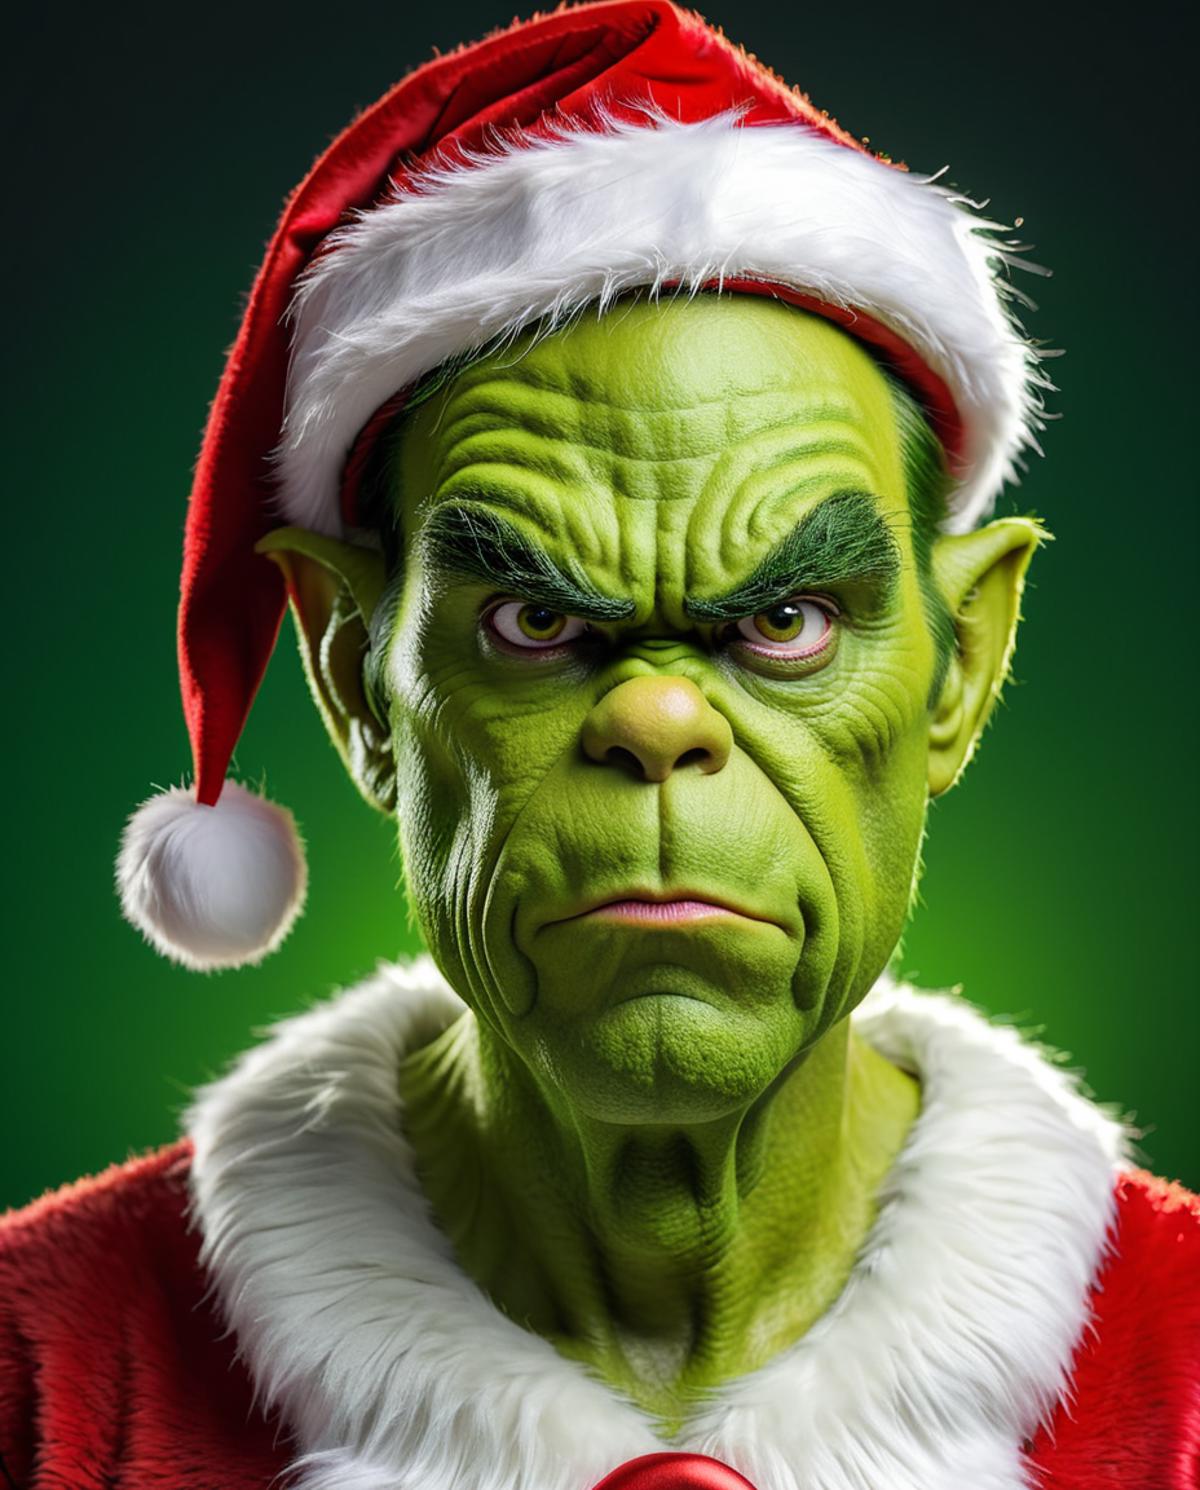 A computer-generated image of a green, angry face with a Santa hat on.